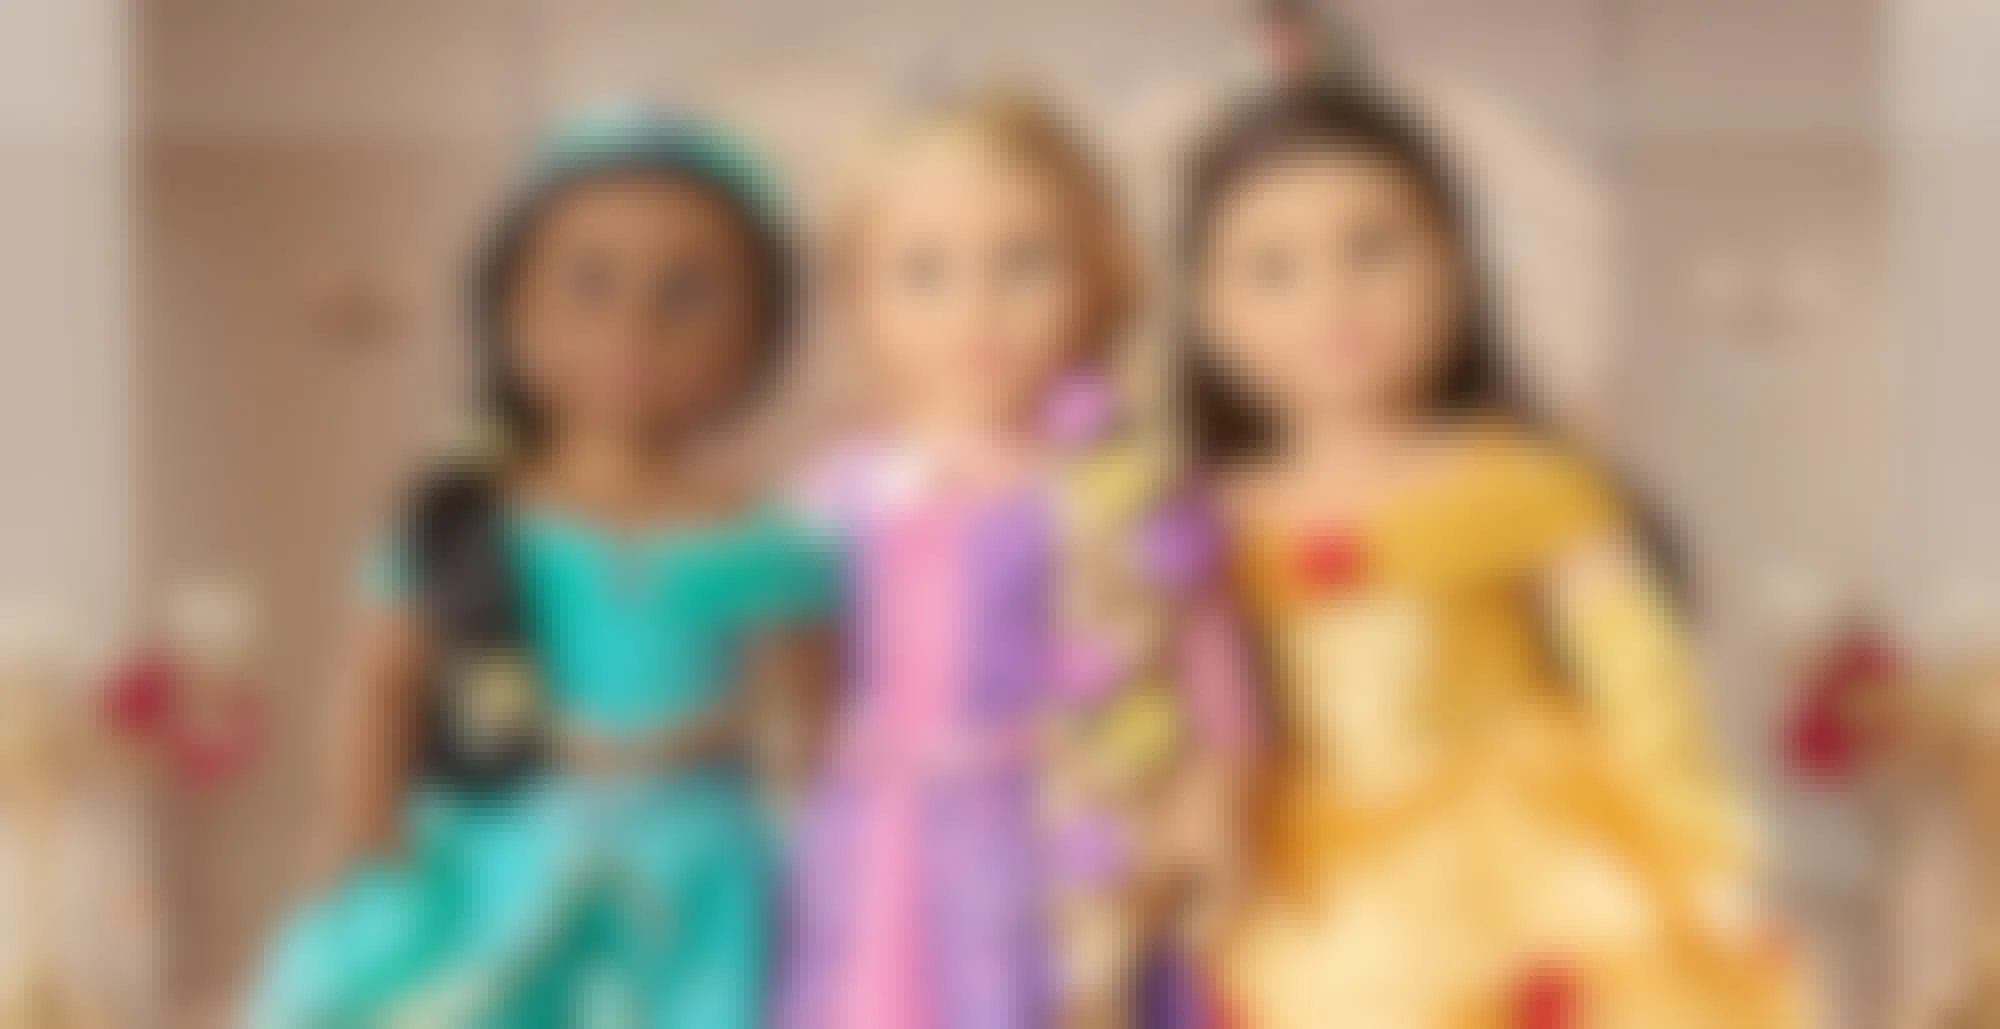 These Disney Princess American Girl Dolls Cost $300, But They're Already Selling Out